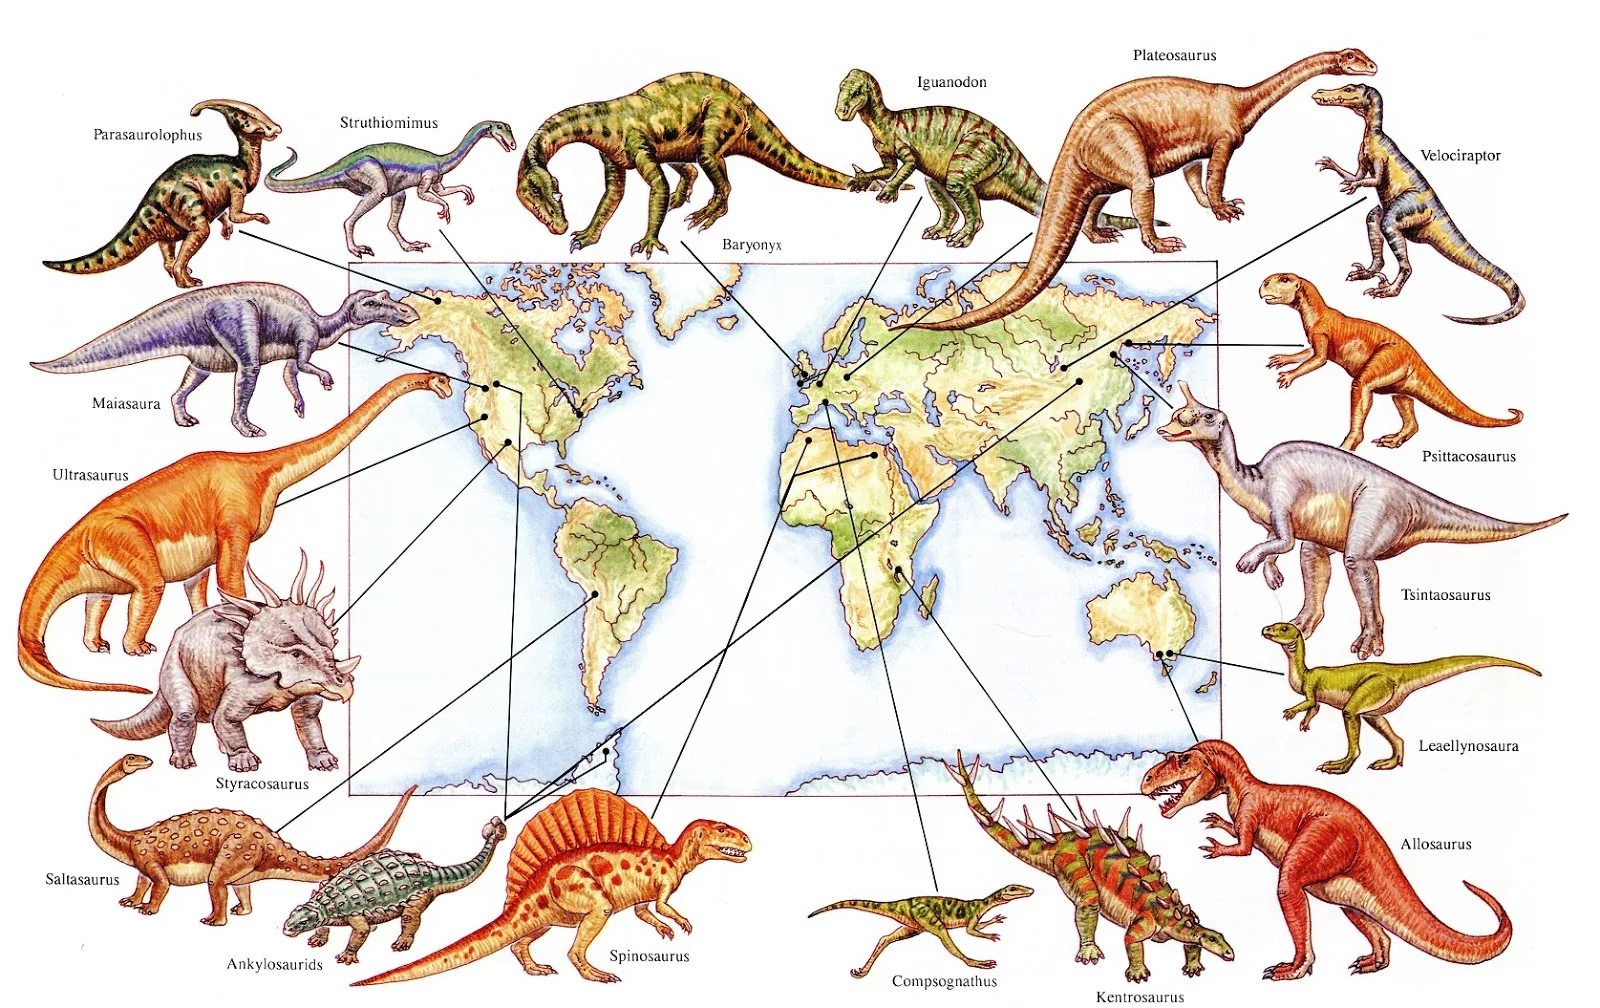 Dinosaurs of the World